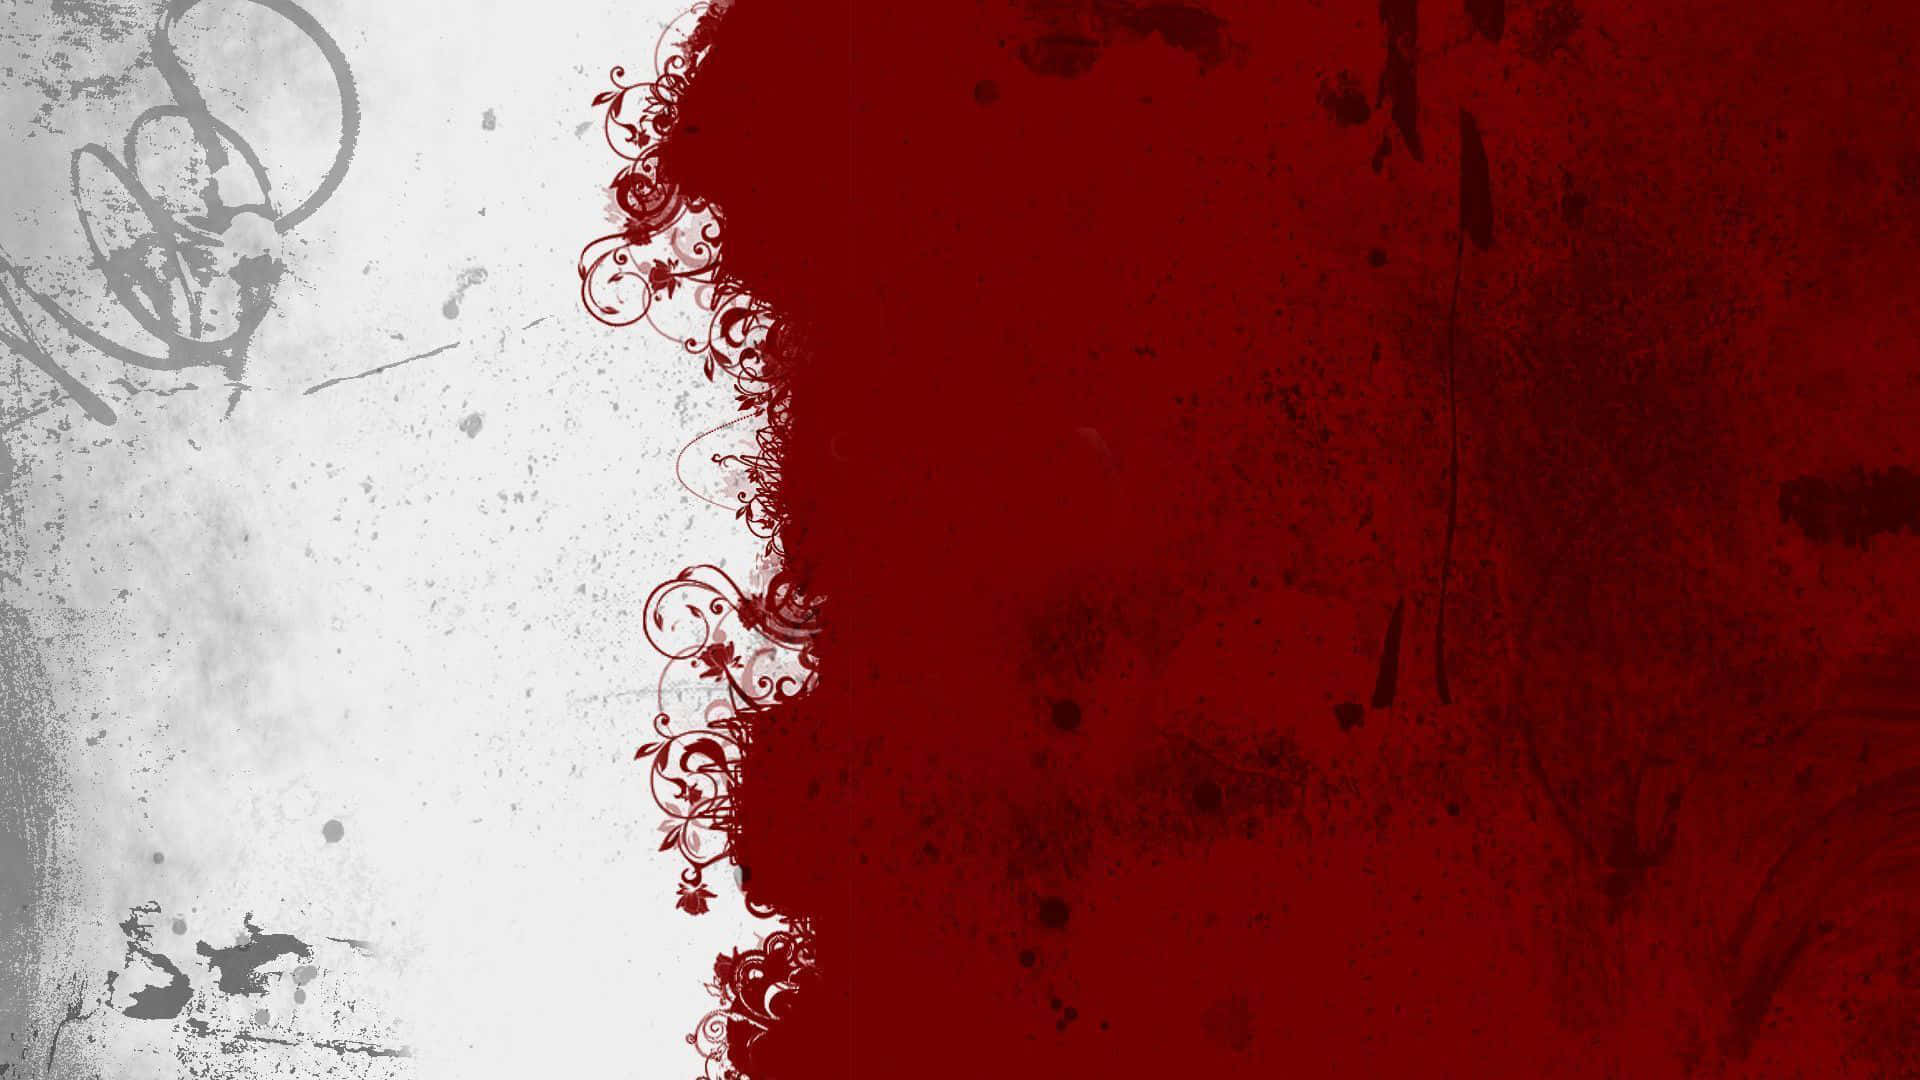 A Red And White Painting With A Black Background Wallpaper